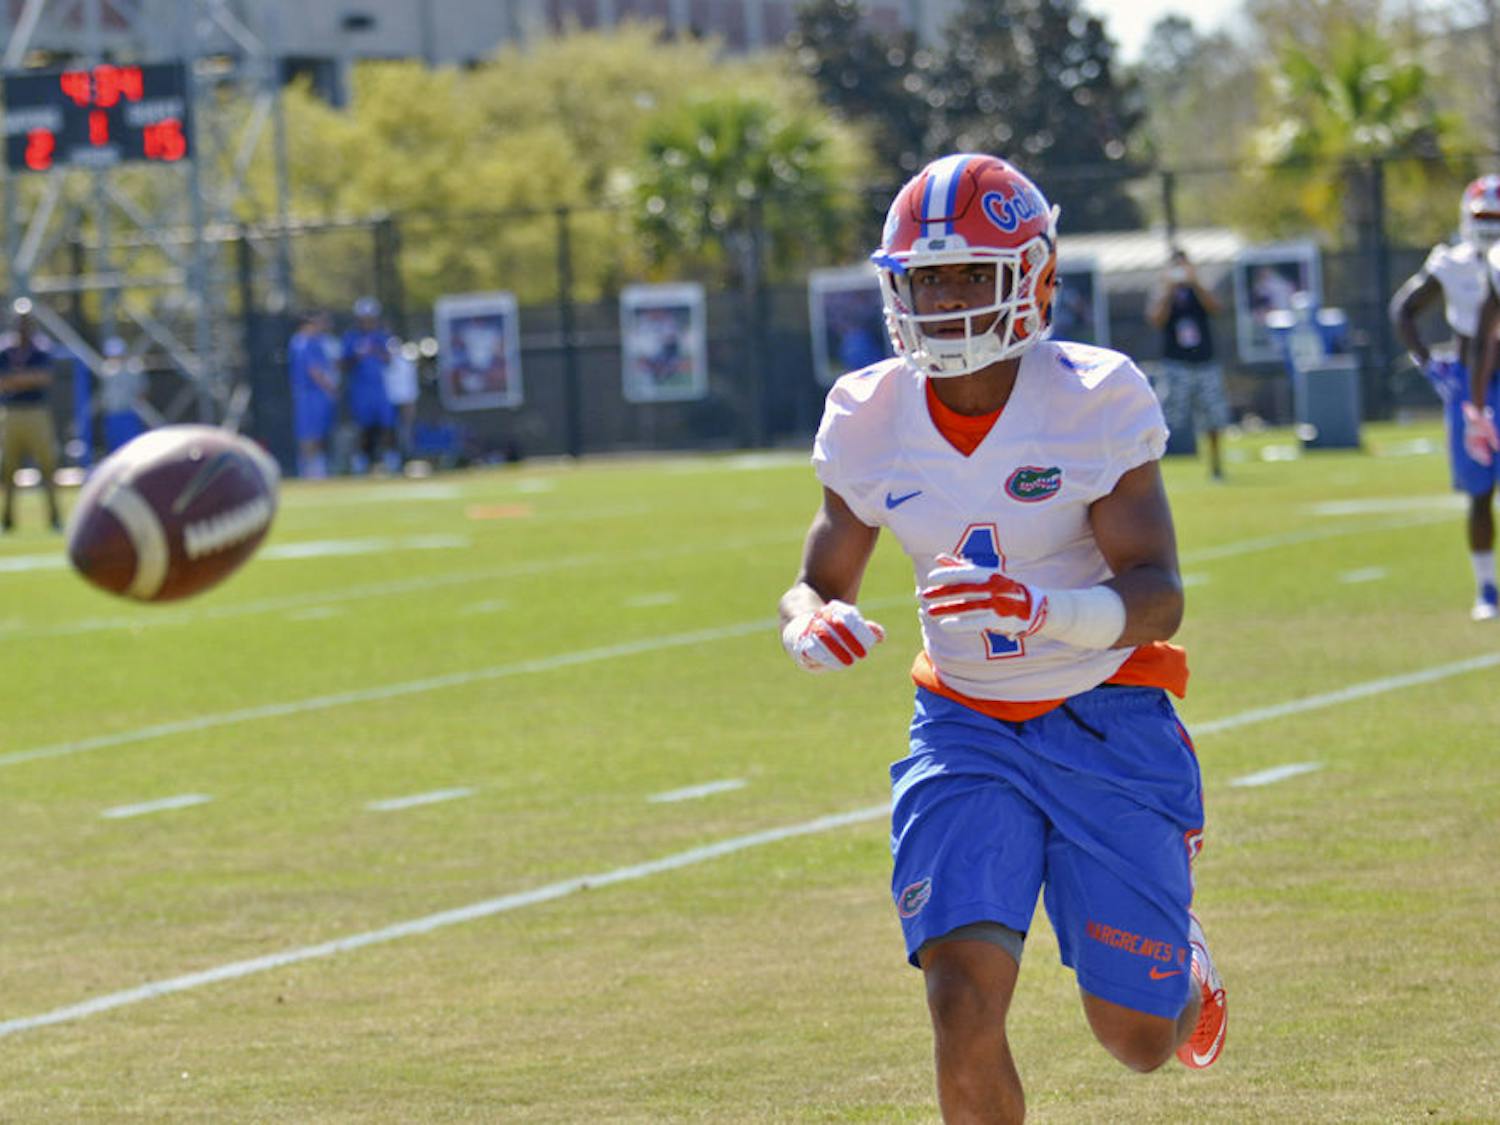 Vernon Hargreaves III runs to catch a ball during practice at Donald R. Dizney Stadium.